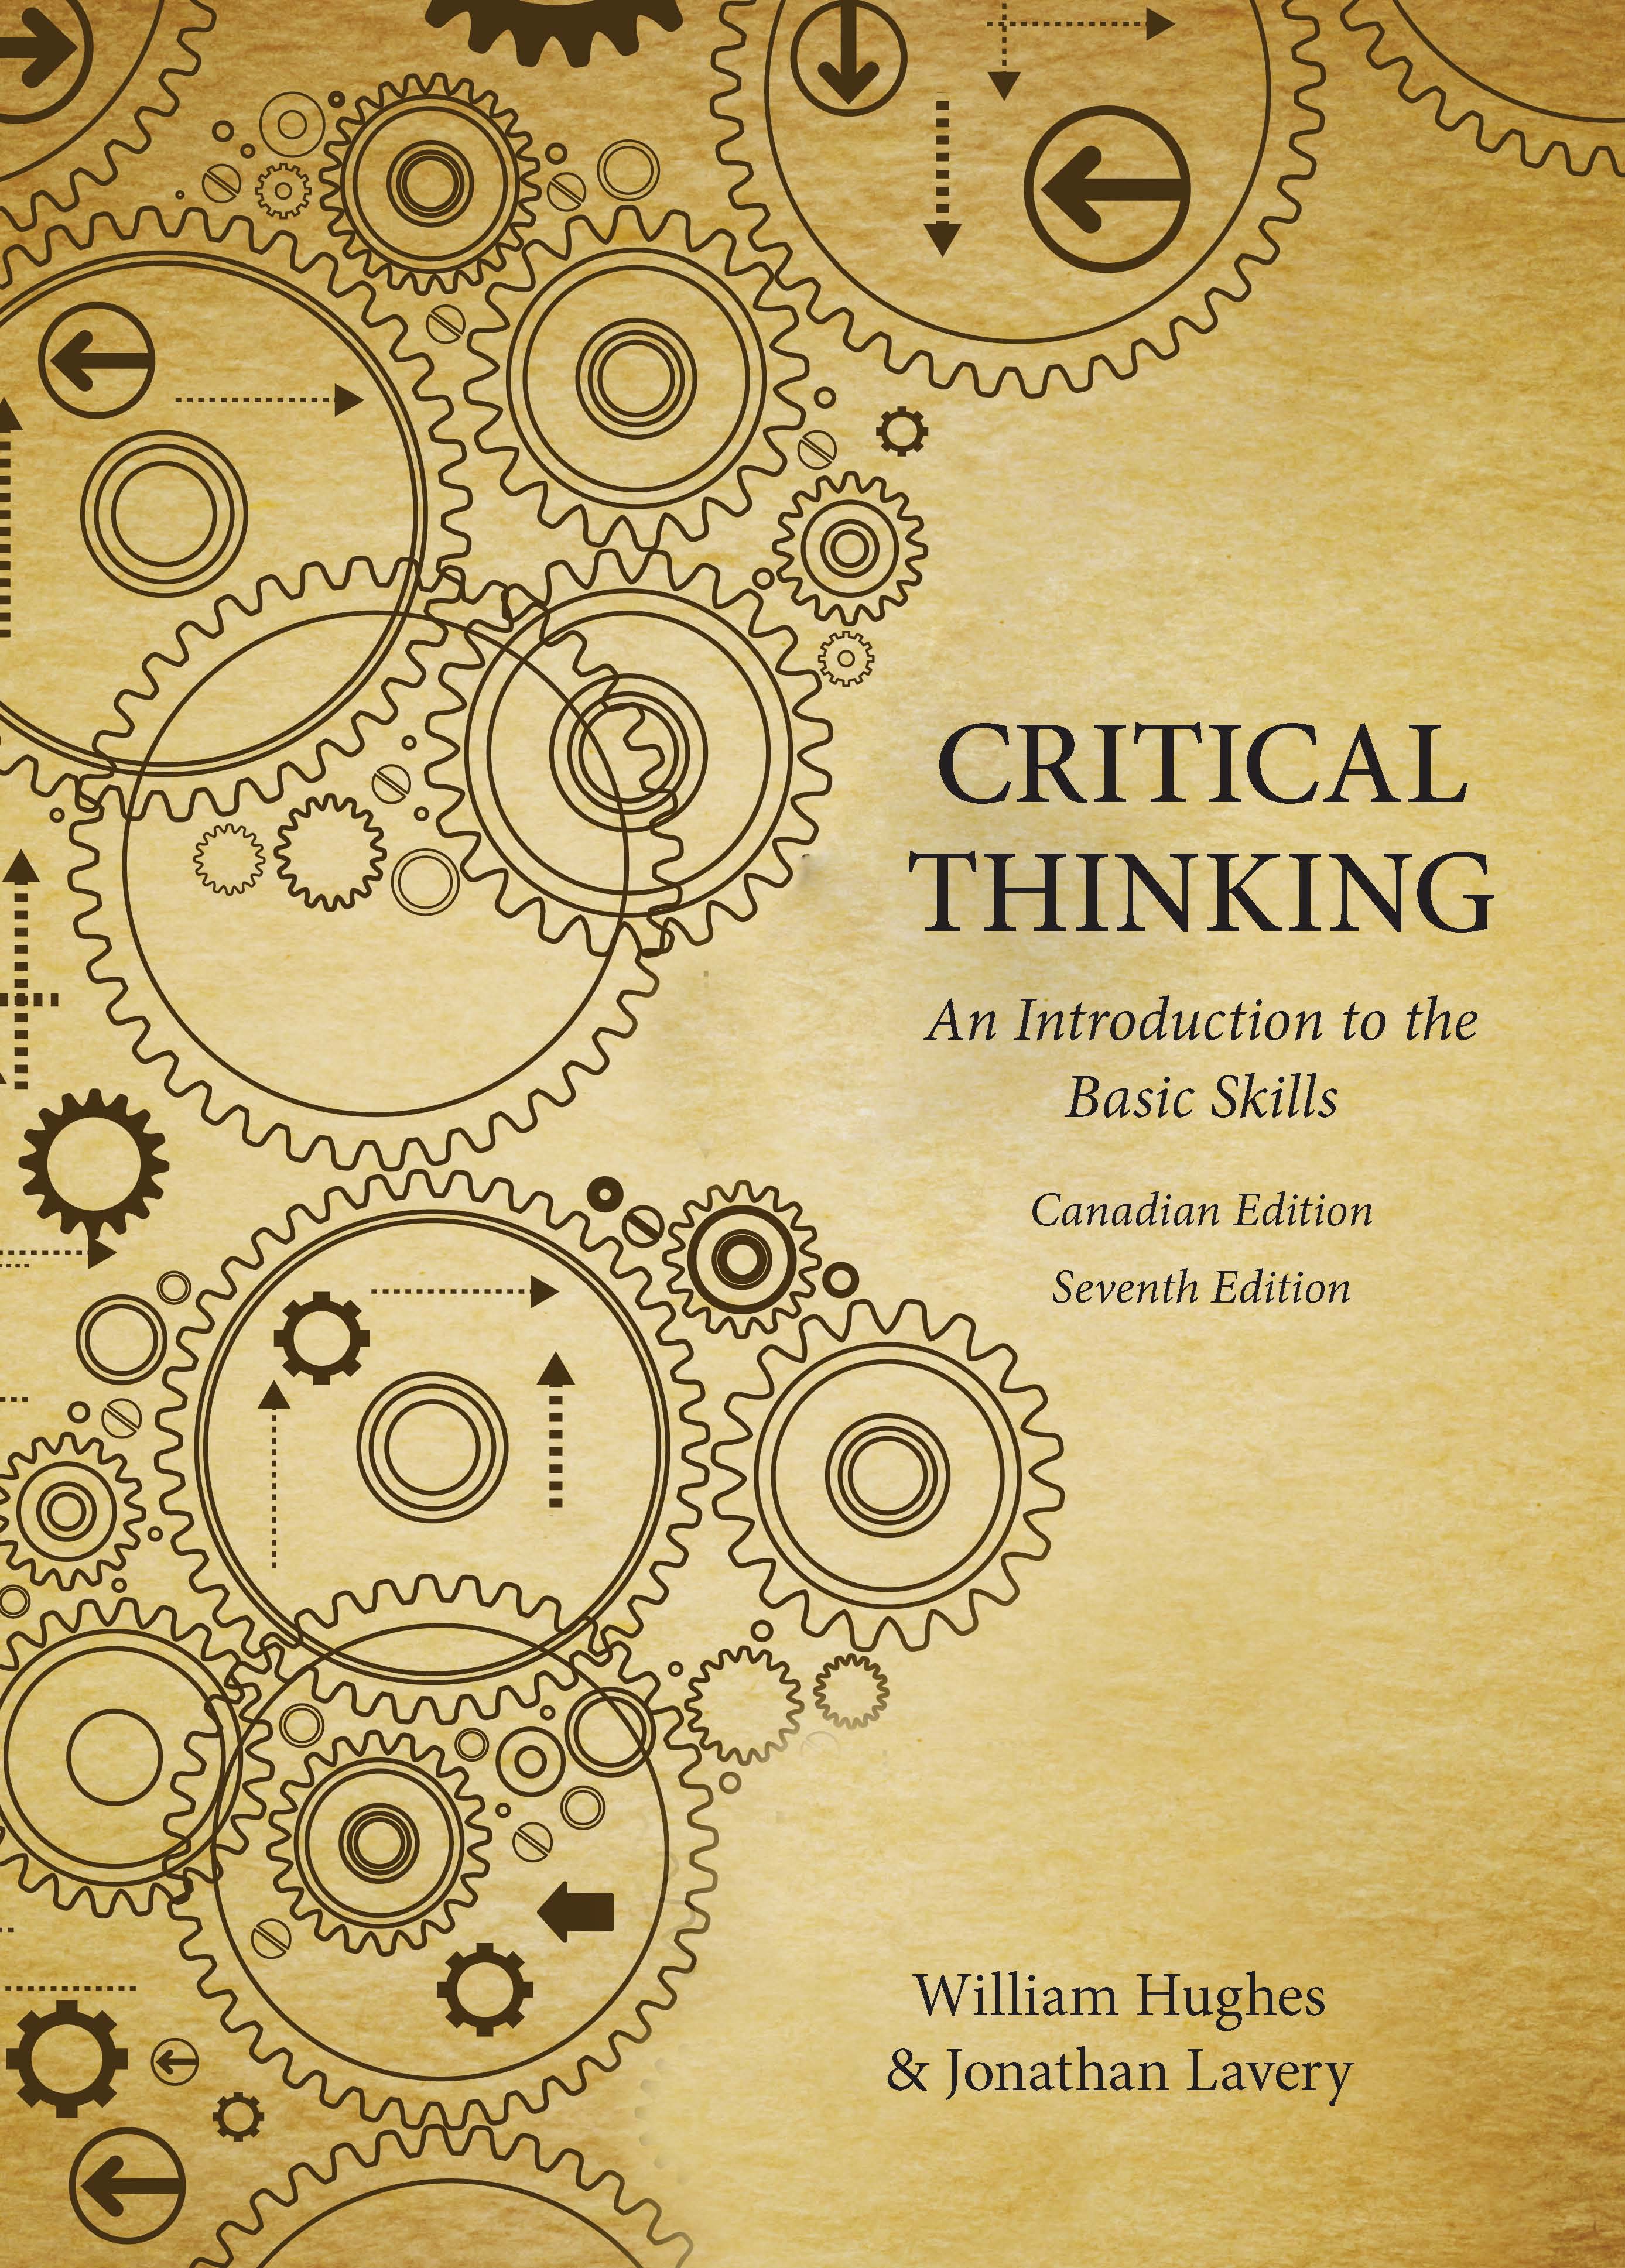 critical thinking textbook 7th edition